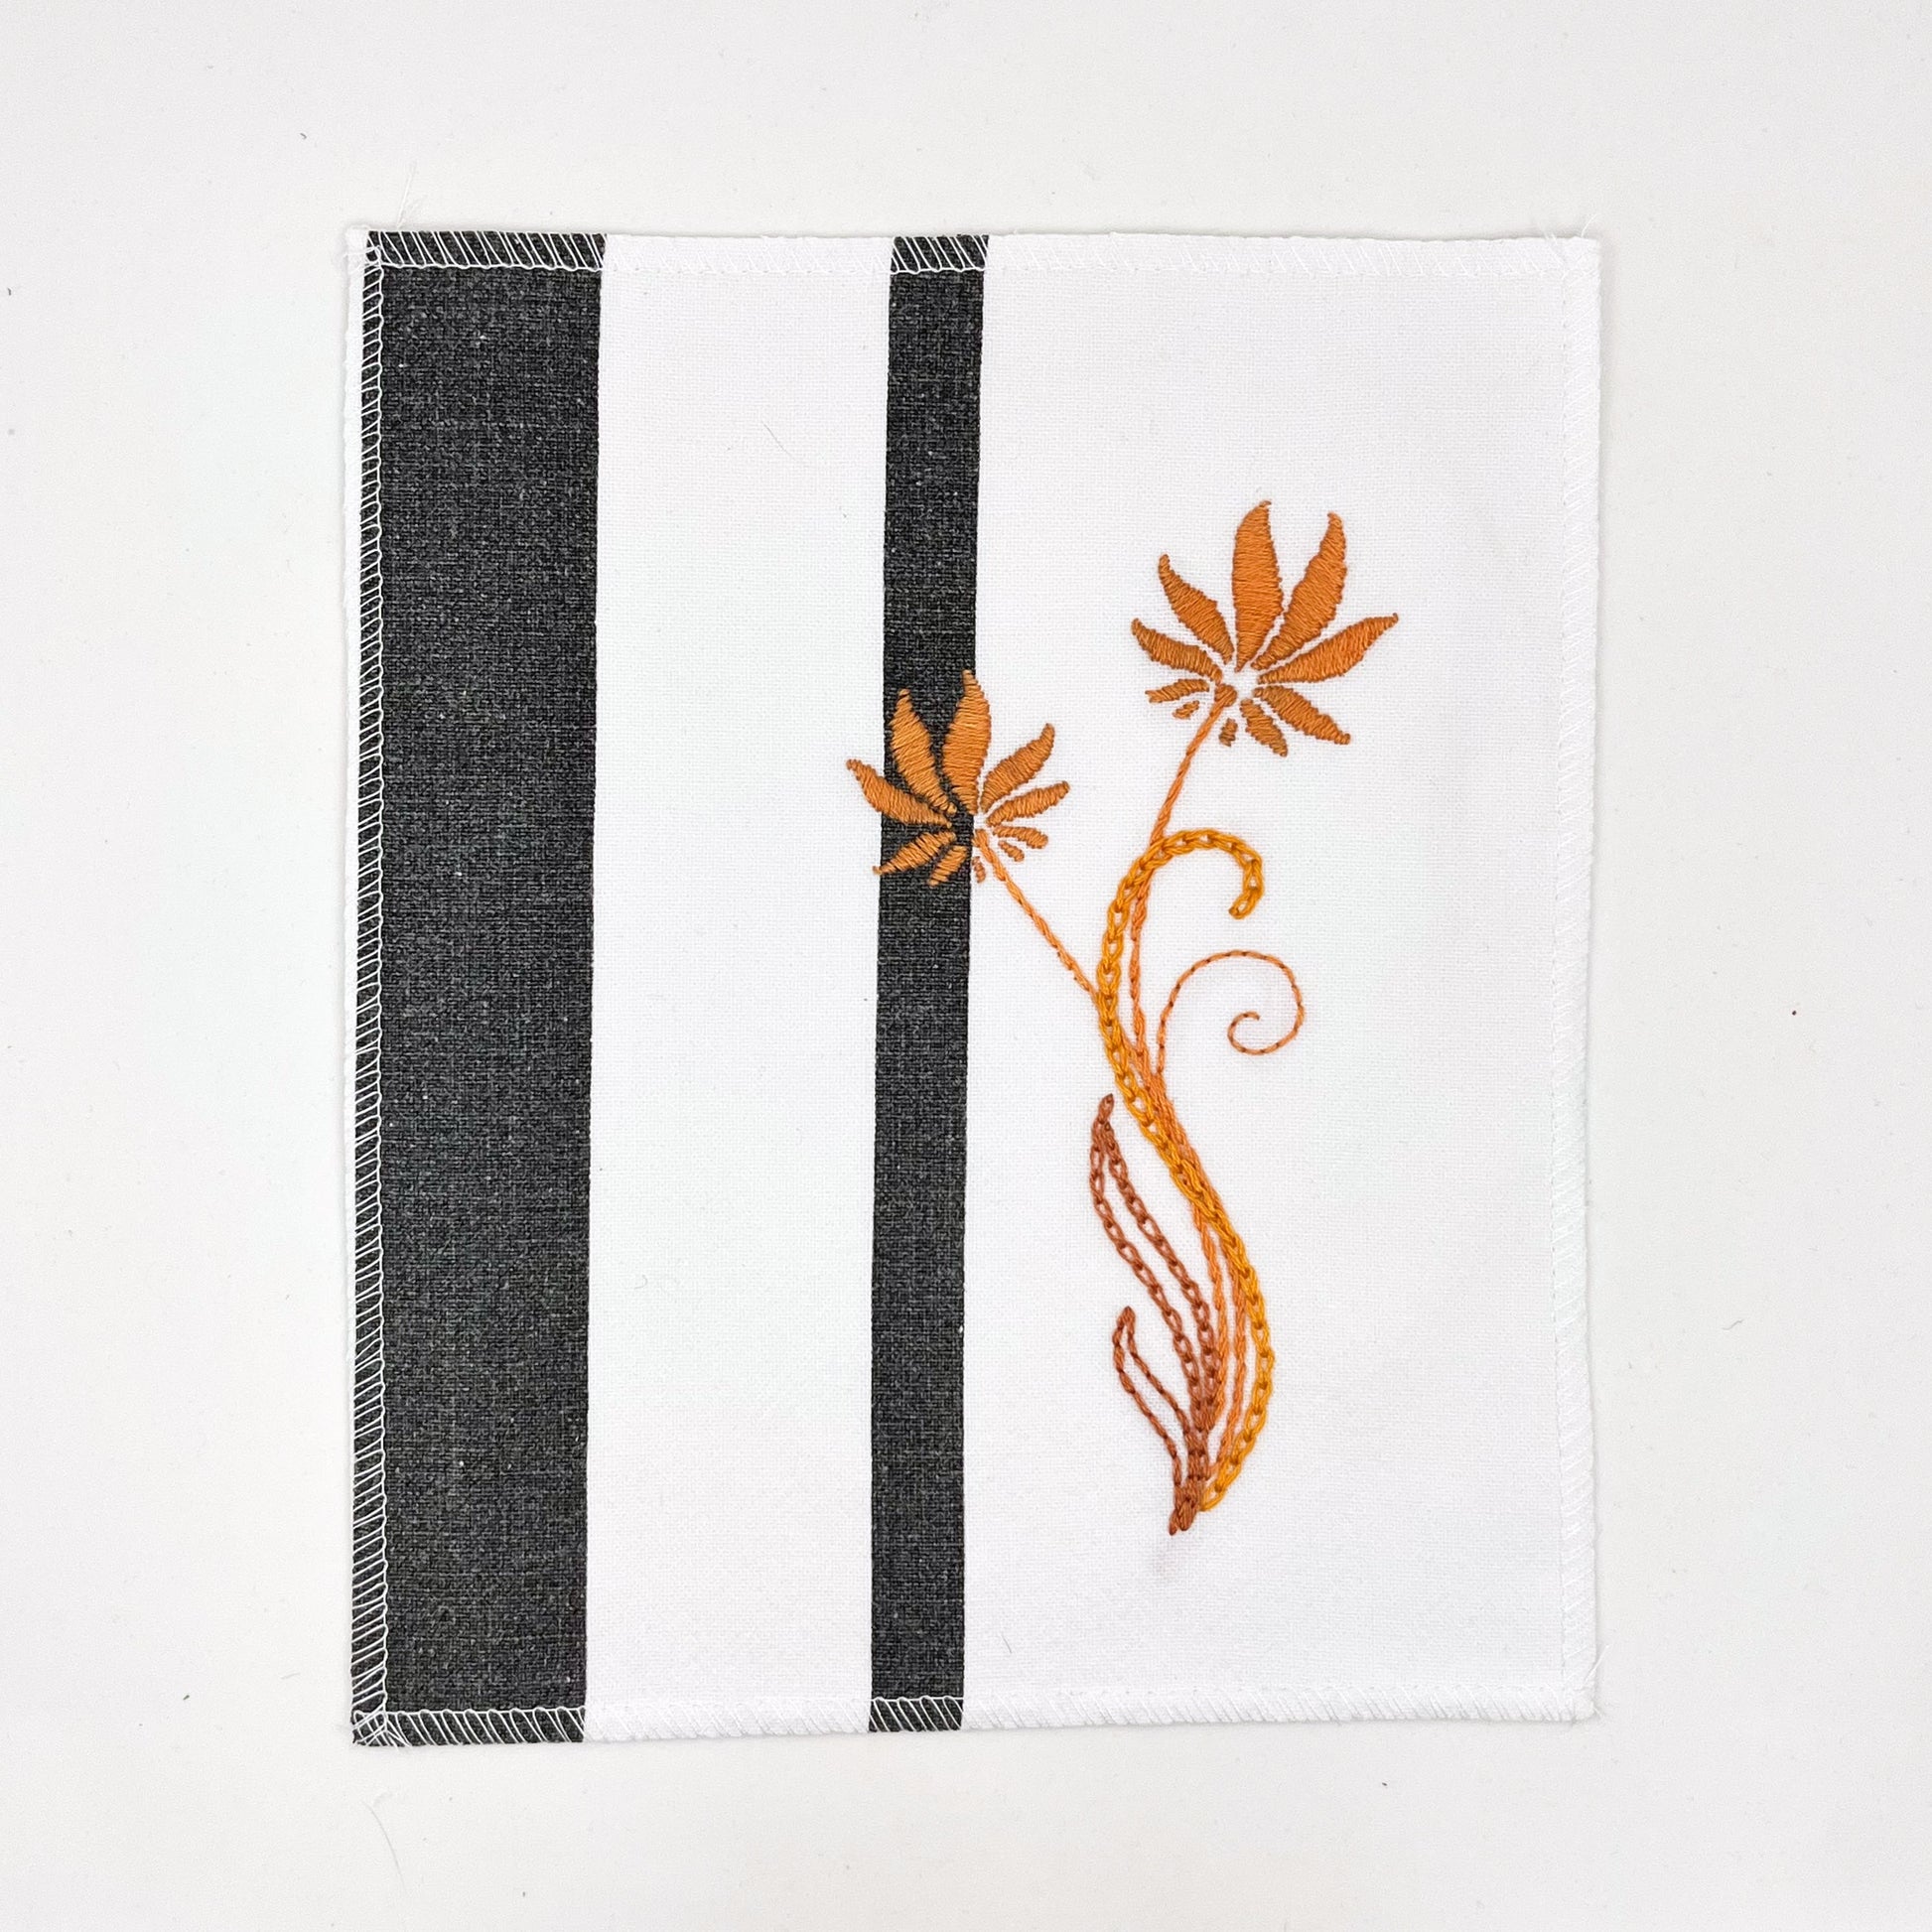 a fabric wall hanging made out of white fabric with black vertical stripes, hand stitched with orange flowers with long curvy stems in chainstitch, backstitch and stem stitch, on a white background